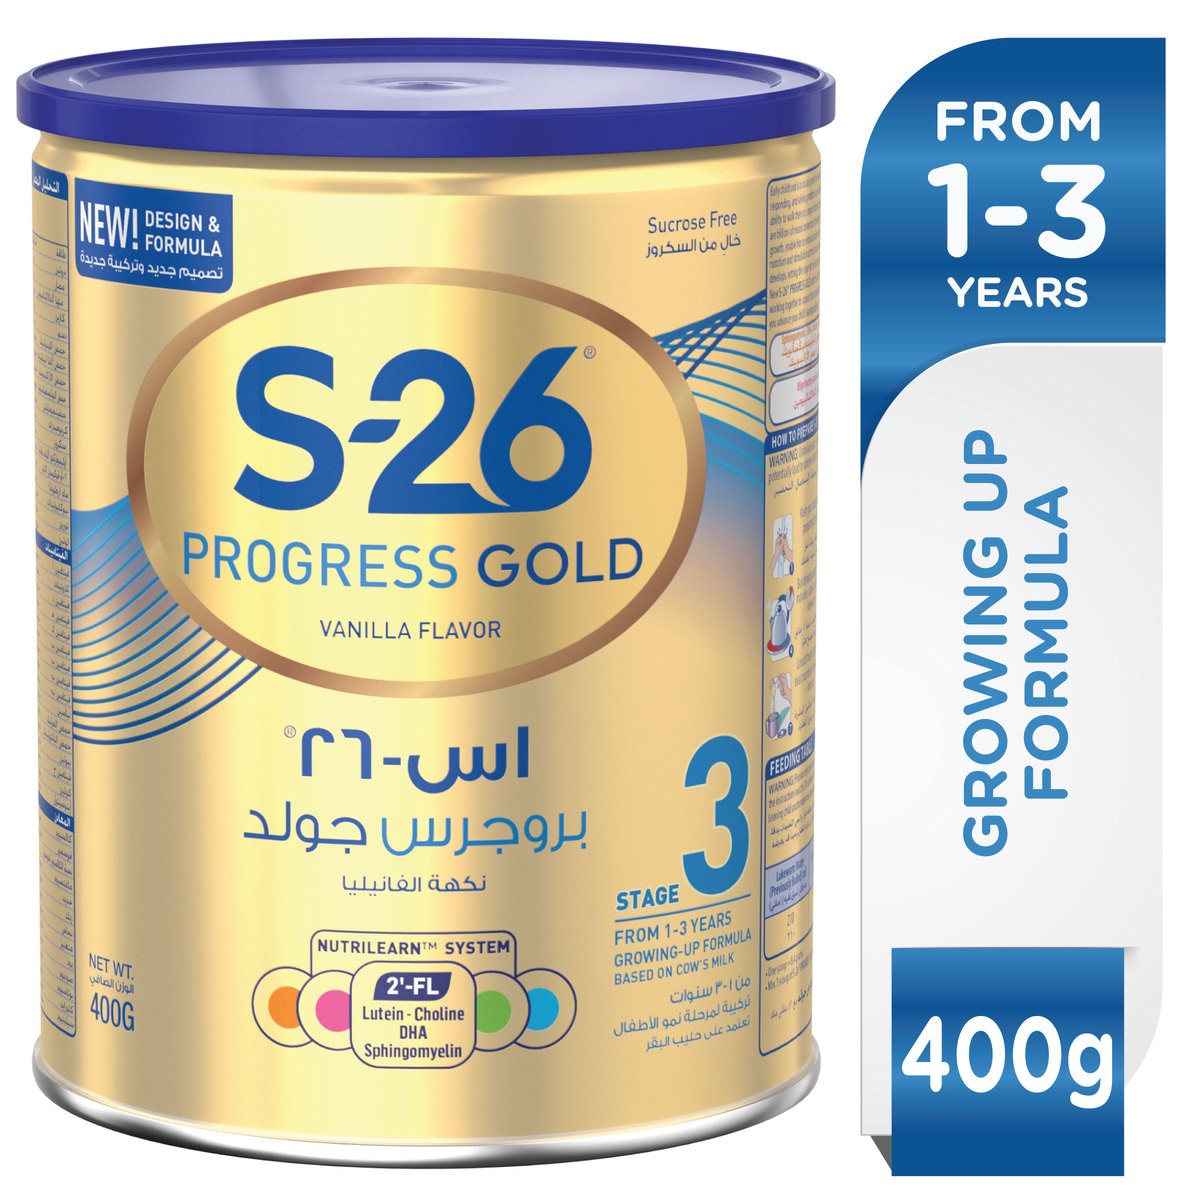 Wyeth Nutrition S26 Progress Gold Stage 3 1-3 Years Premium Milk Powder Tin for Toddlers 400g